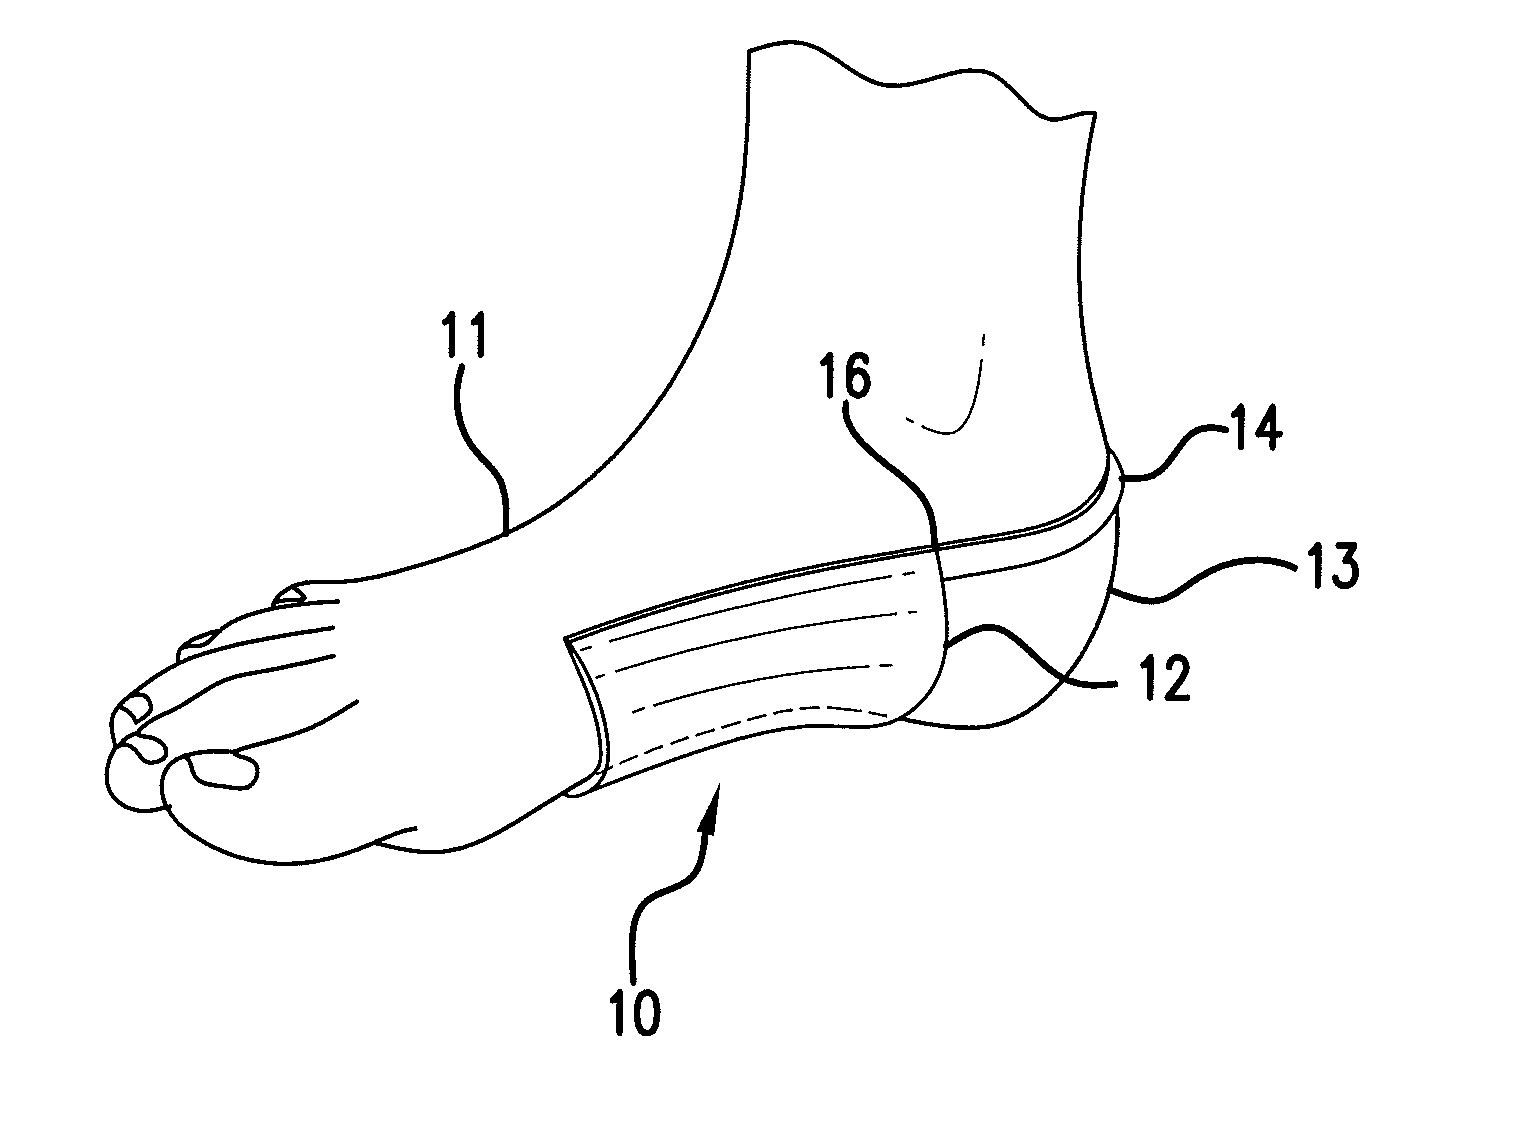 Arch strap and method for treating heel pain